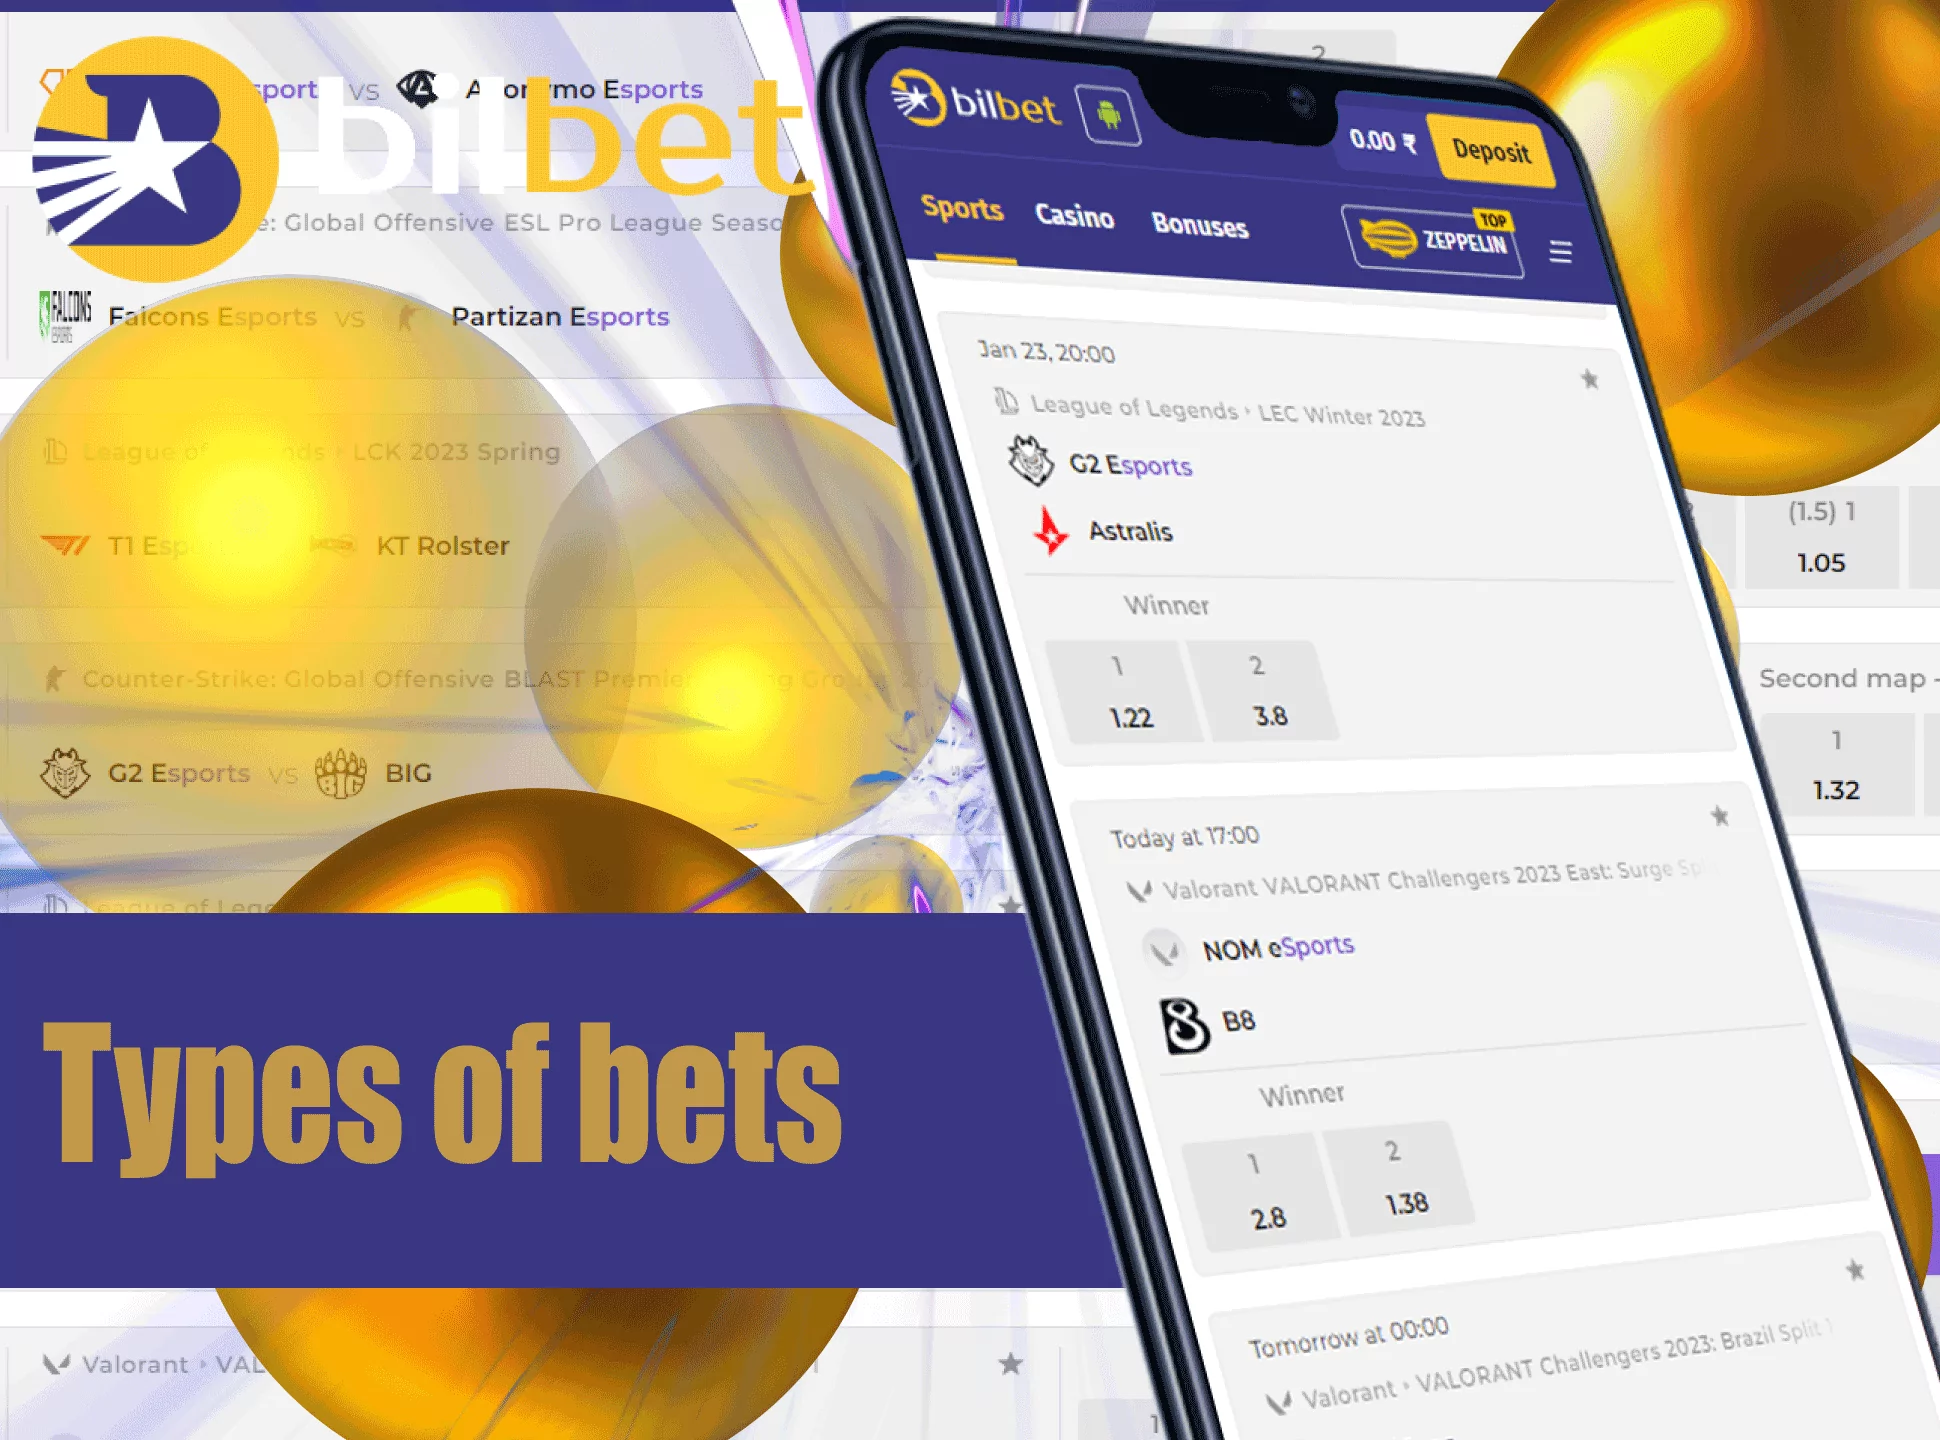 Choose your favorite type of bets, place one and win your money.